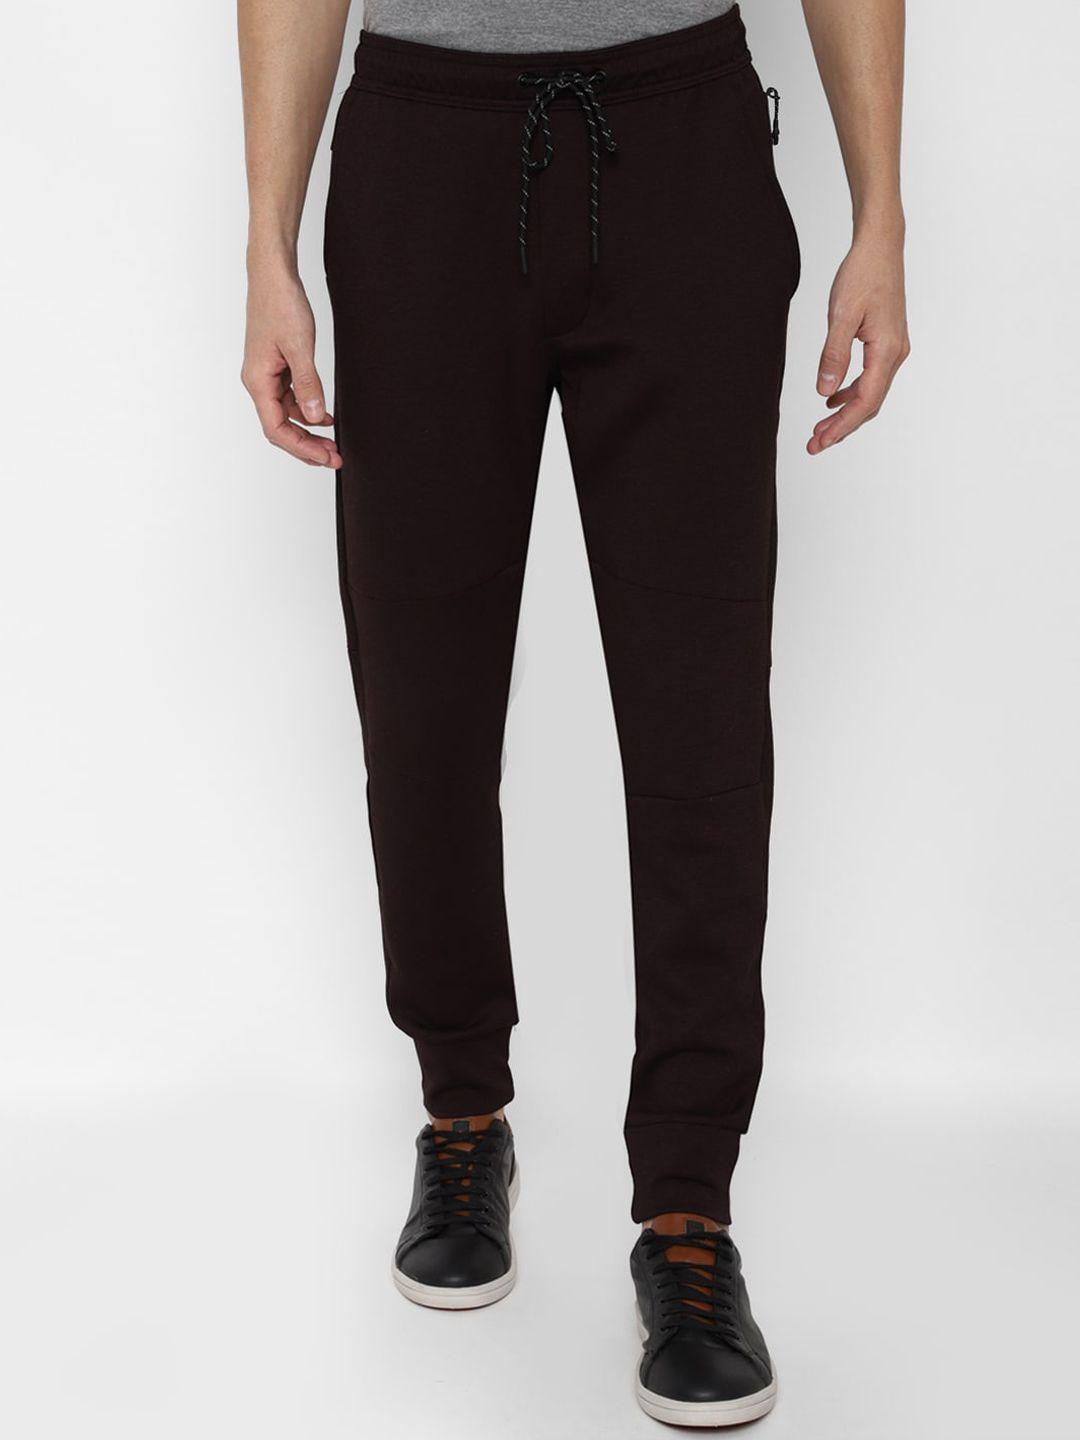 AMERICAN EAGLE OUTFITTERS Men Solid Cotton Jogger Track Pants